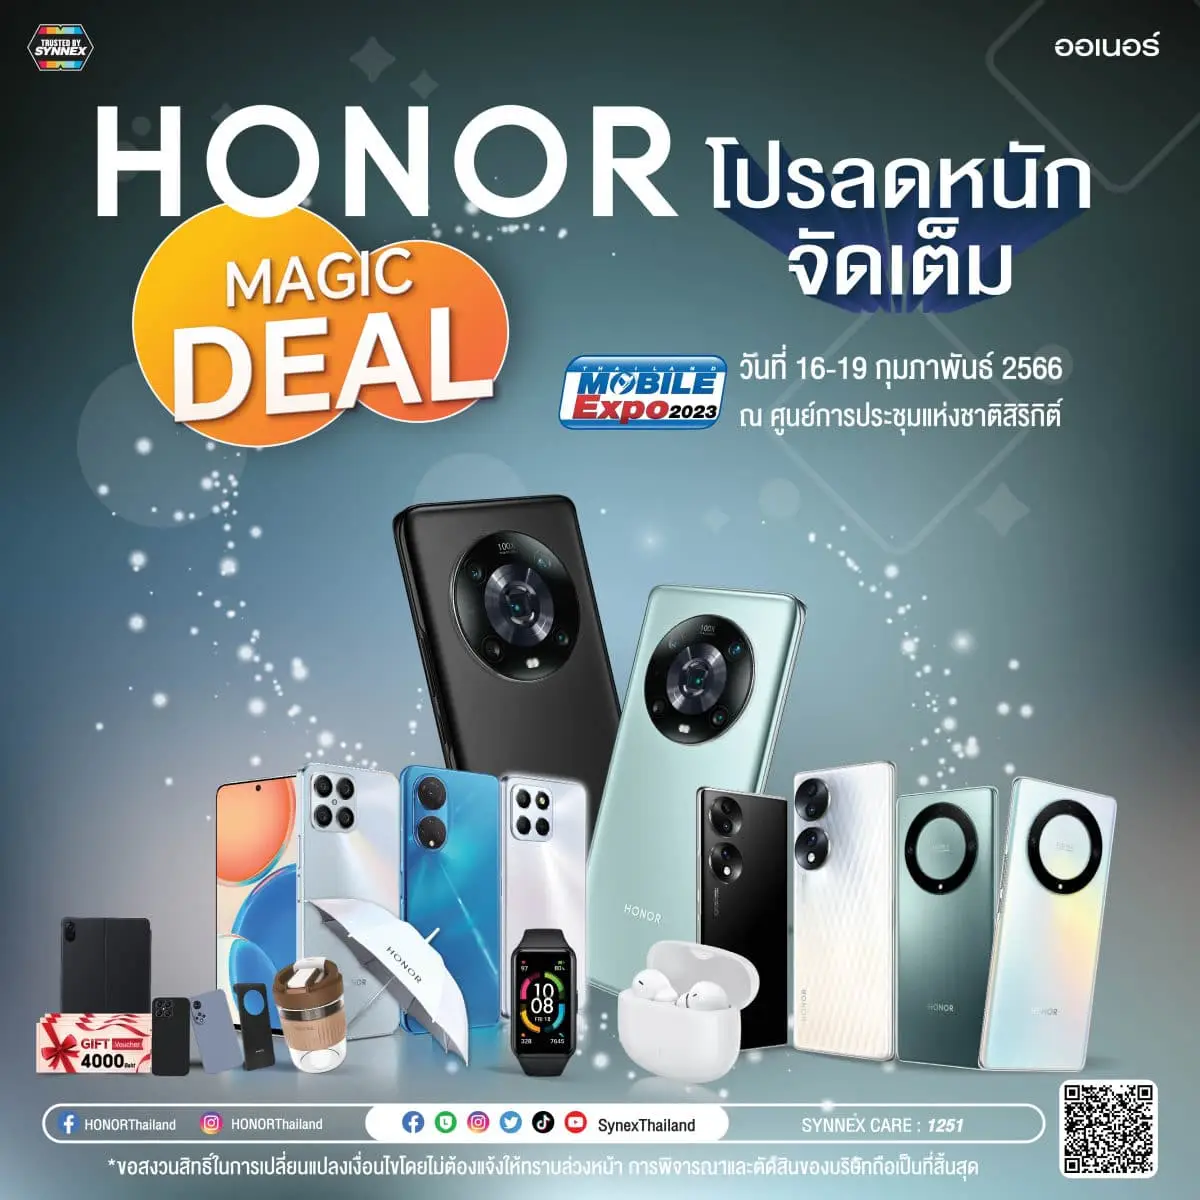 HONOR MAGIC DEAL Thailand Mobile Expo 2023 Promotion